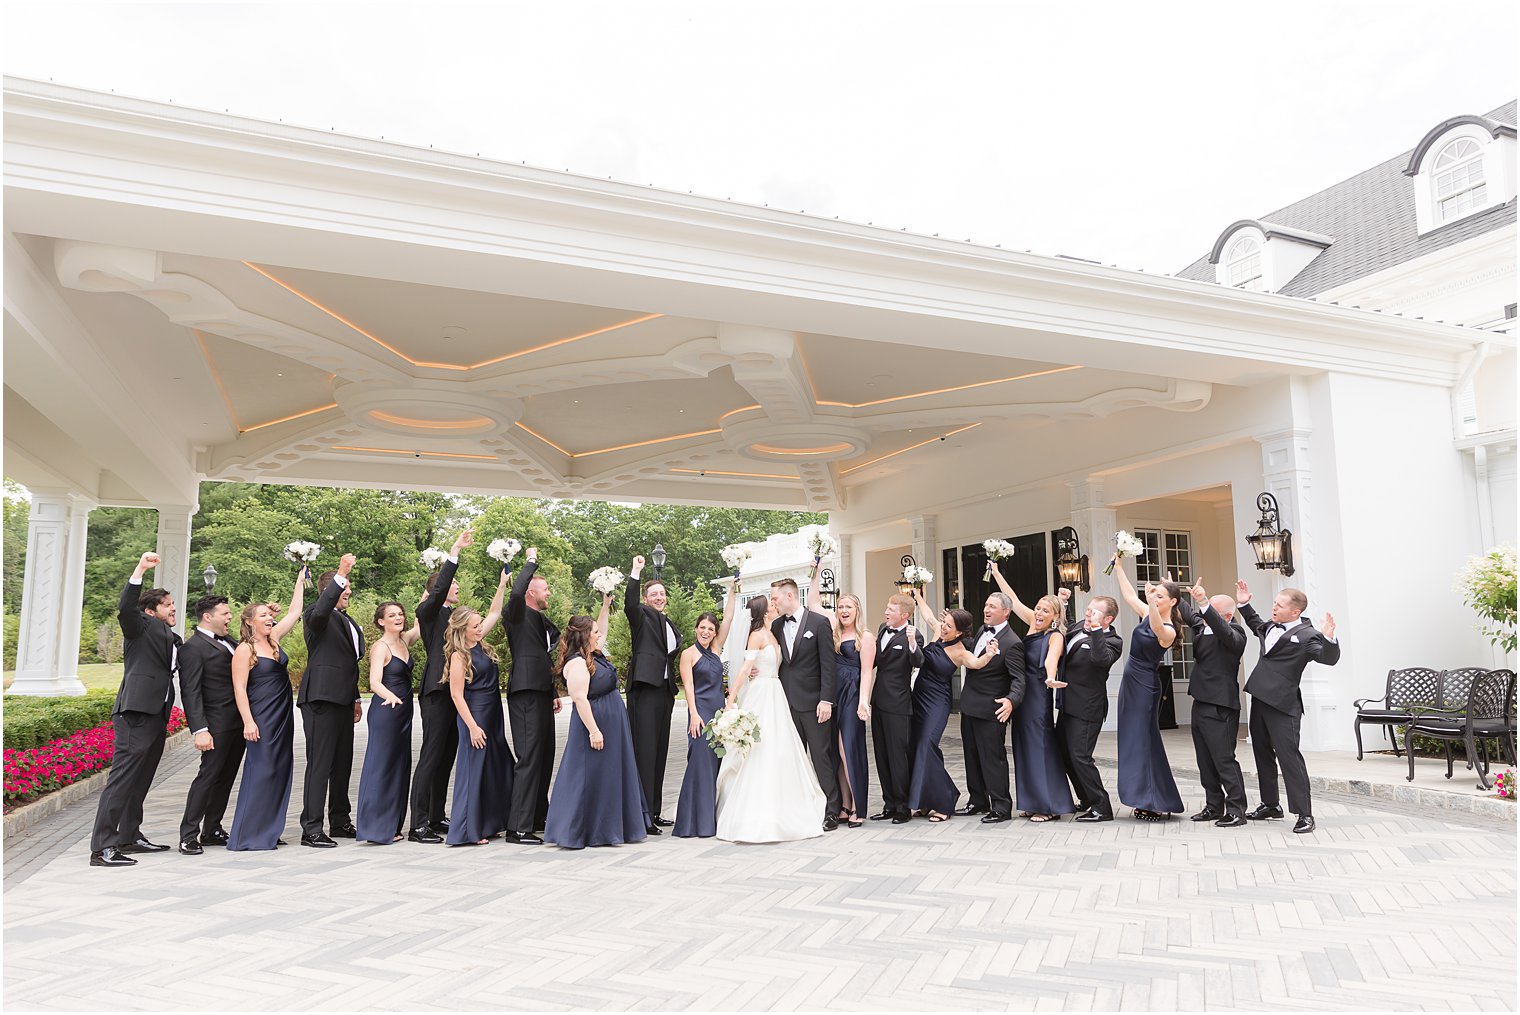 bride and groom kiss with wedding party in navy and black around them